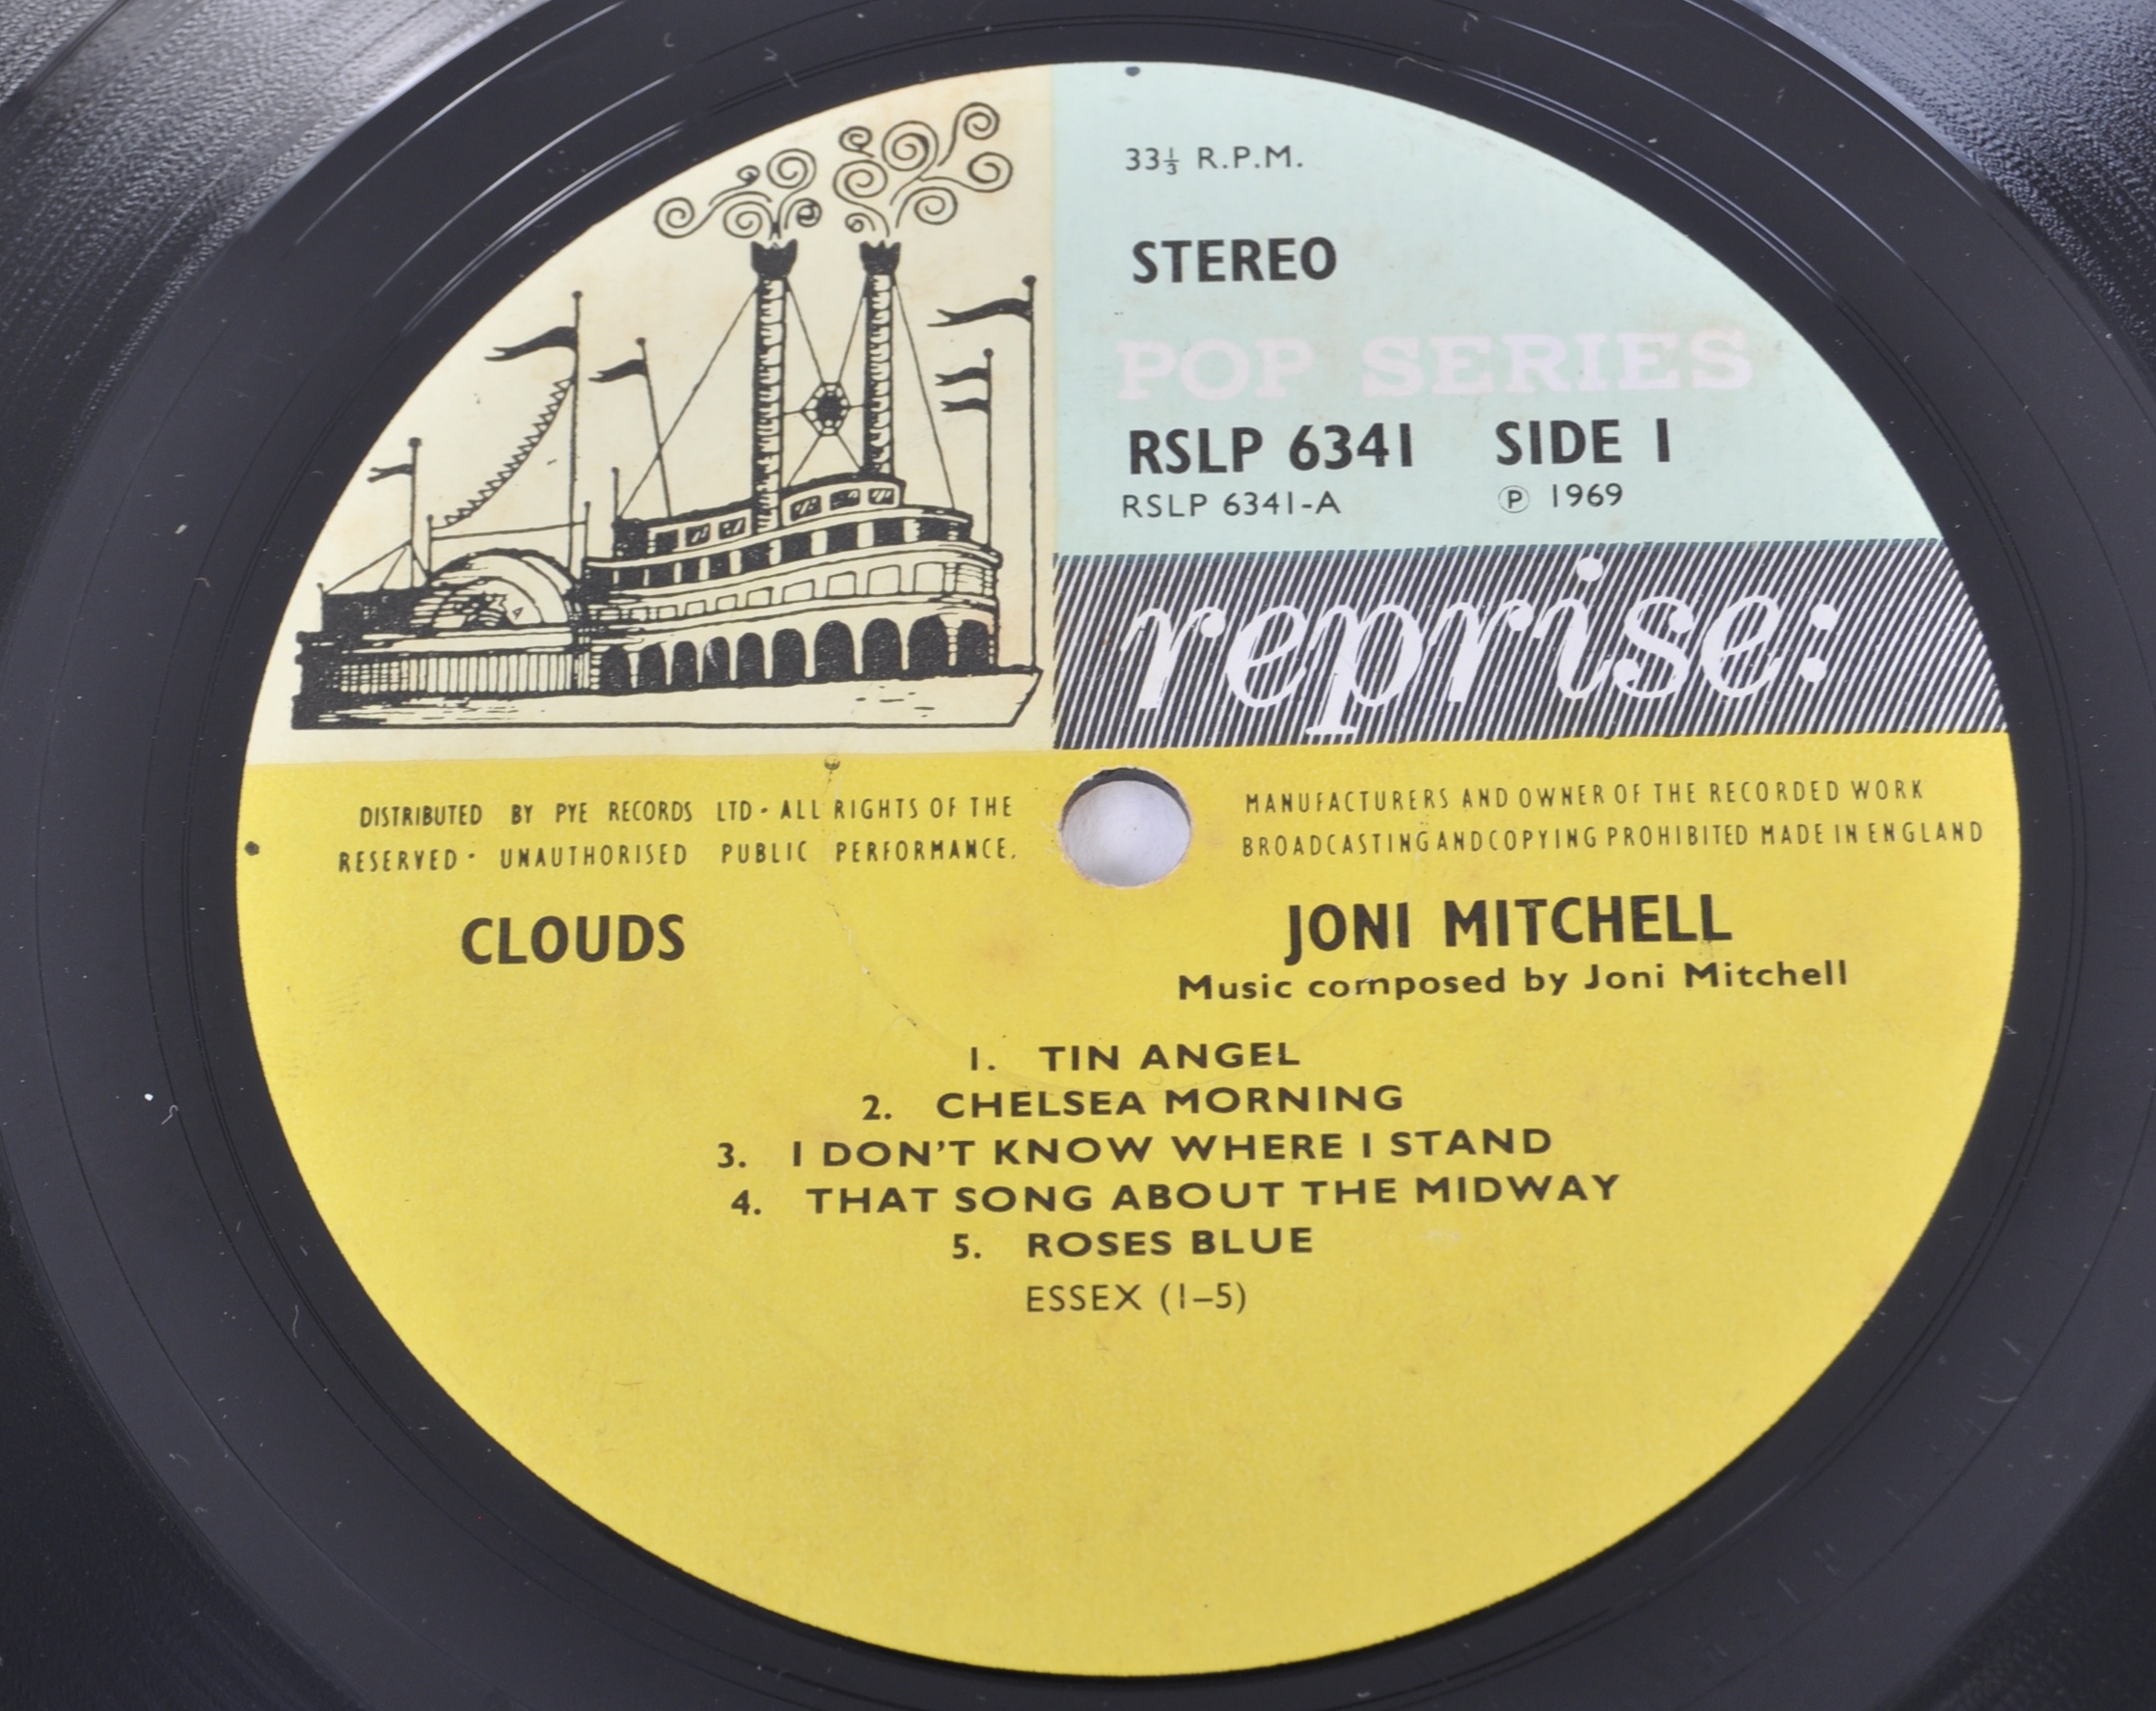 JONI MITCHELL - CLOUDS - 1969 REPRISE RECORDS RELEASE - Image 3 of 4